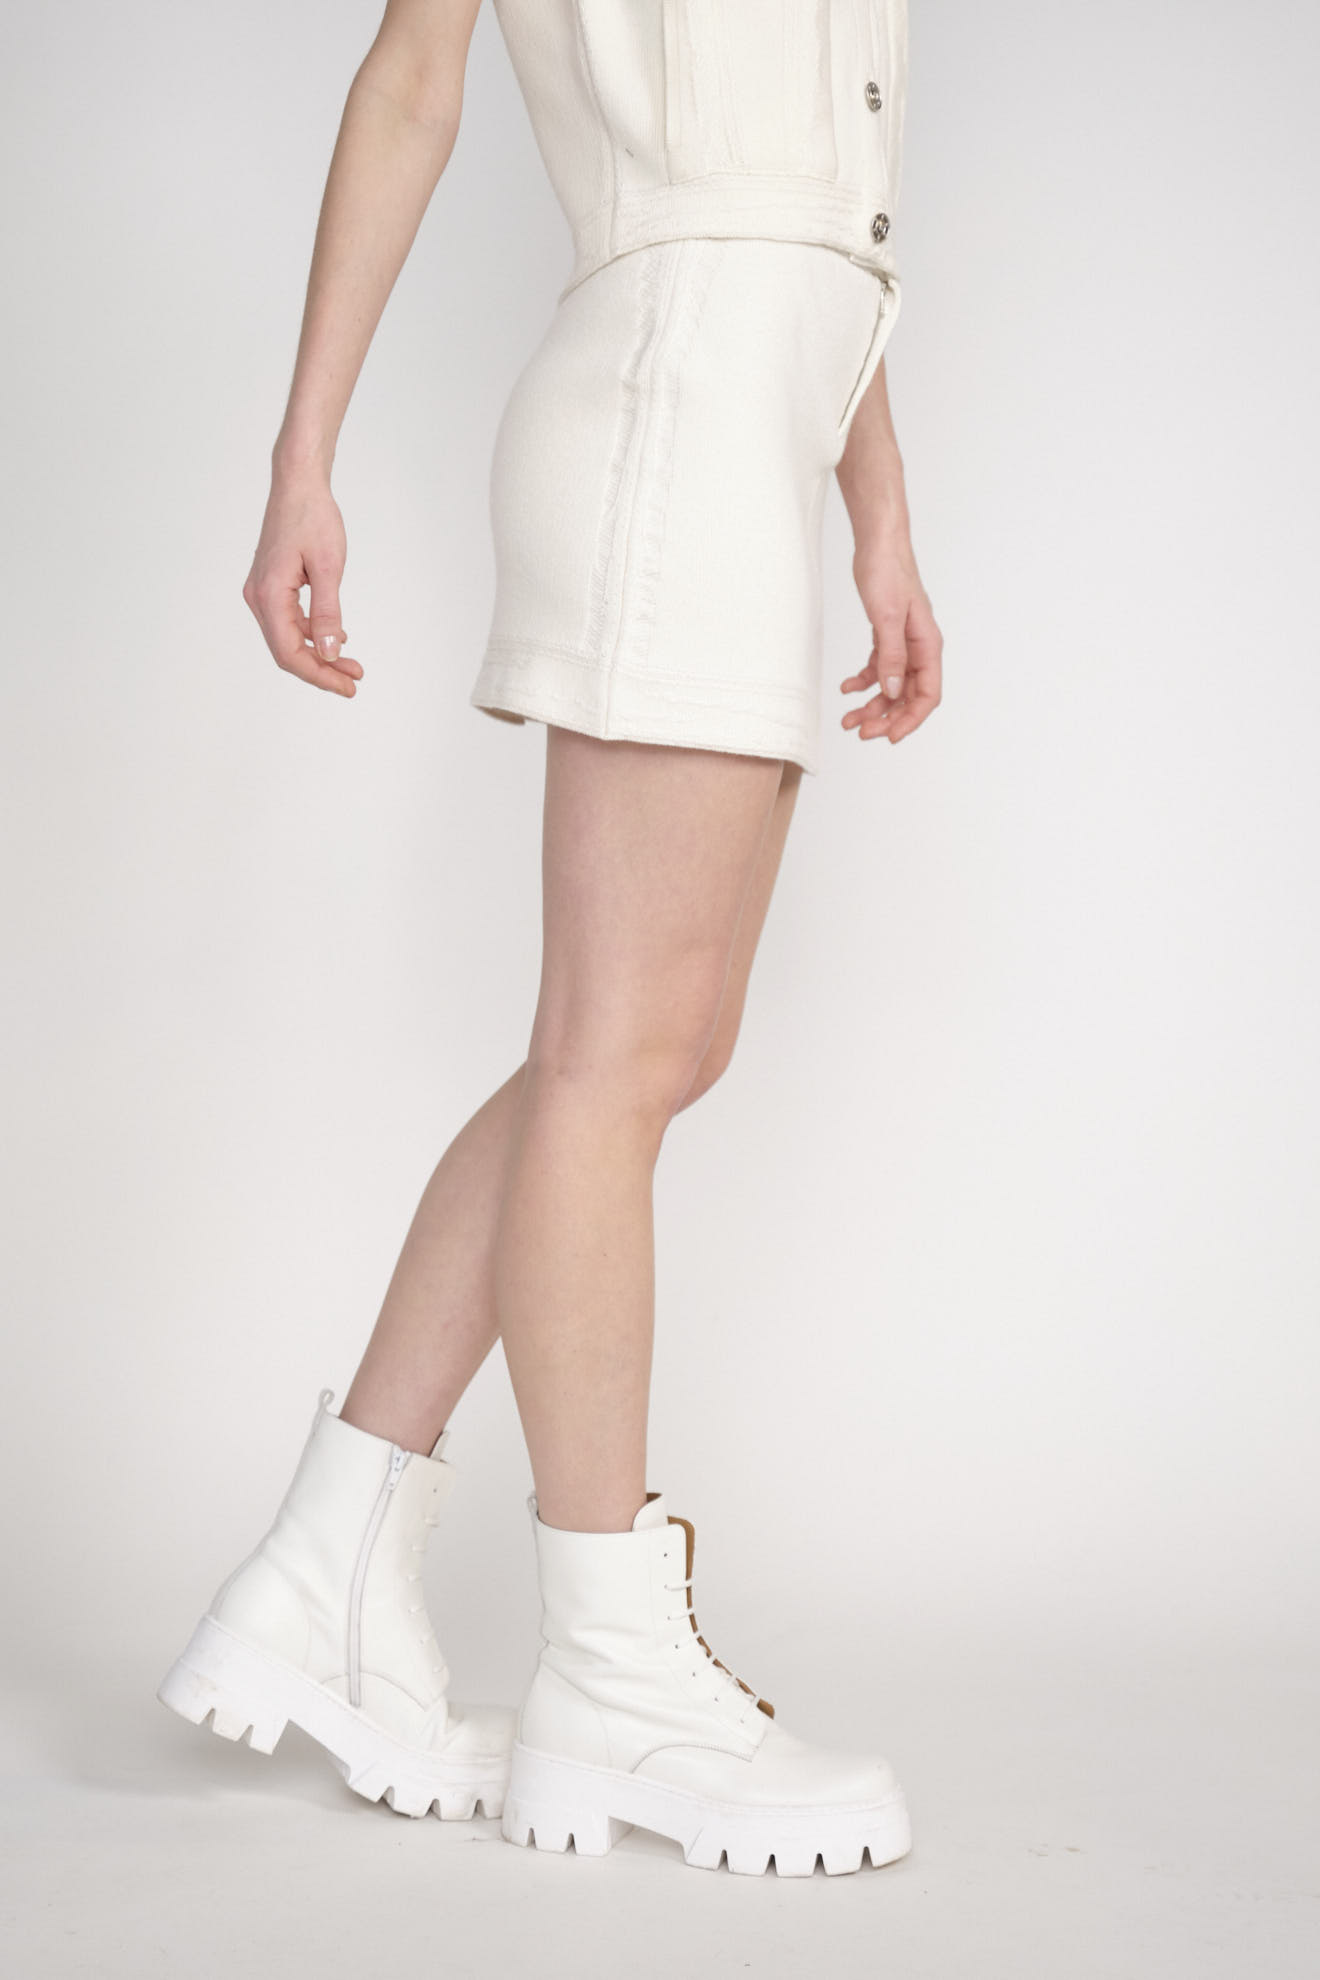 Barrie Denim Cashmere and Cotton SKirt - Miniskirt made out of Cashmere white M